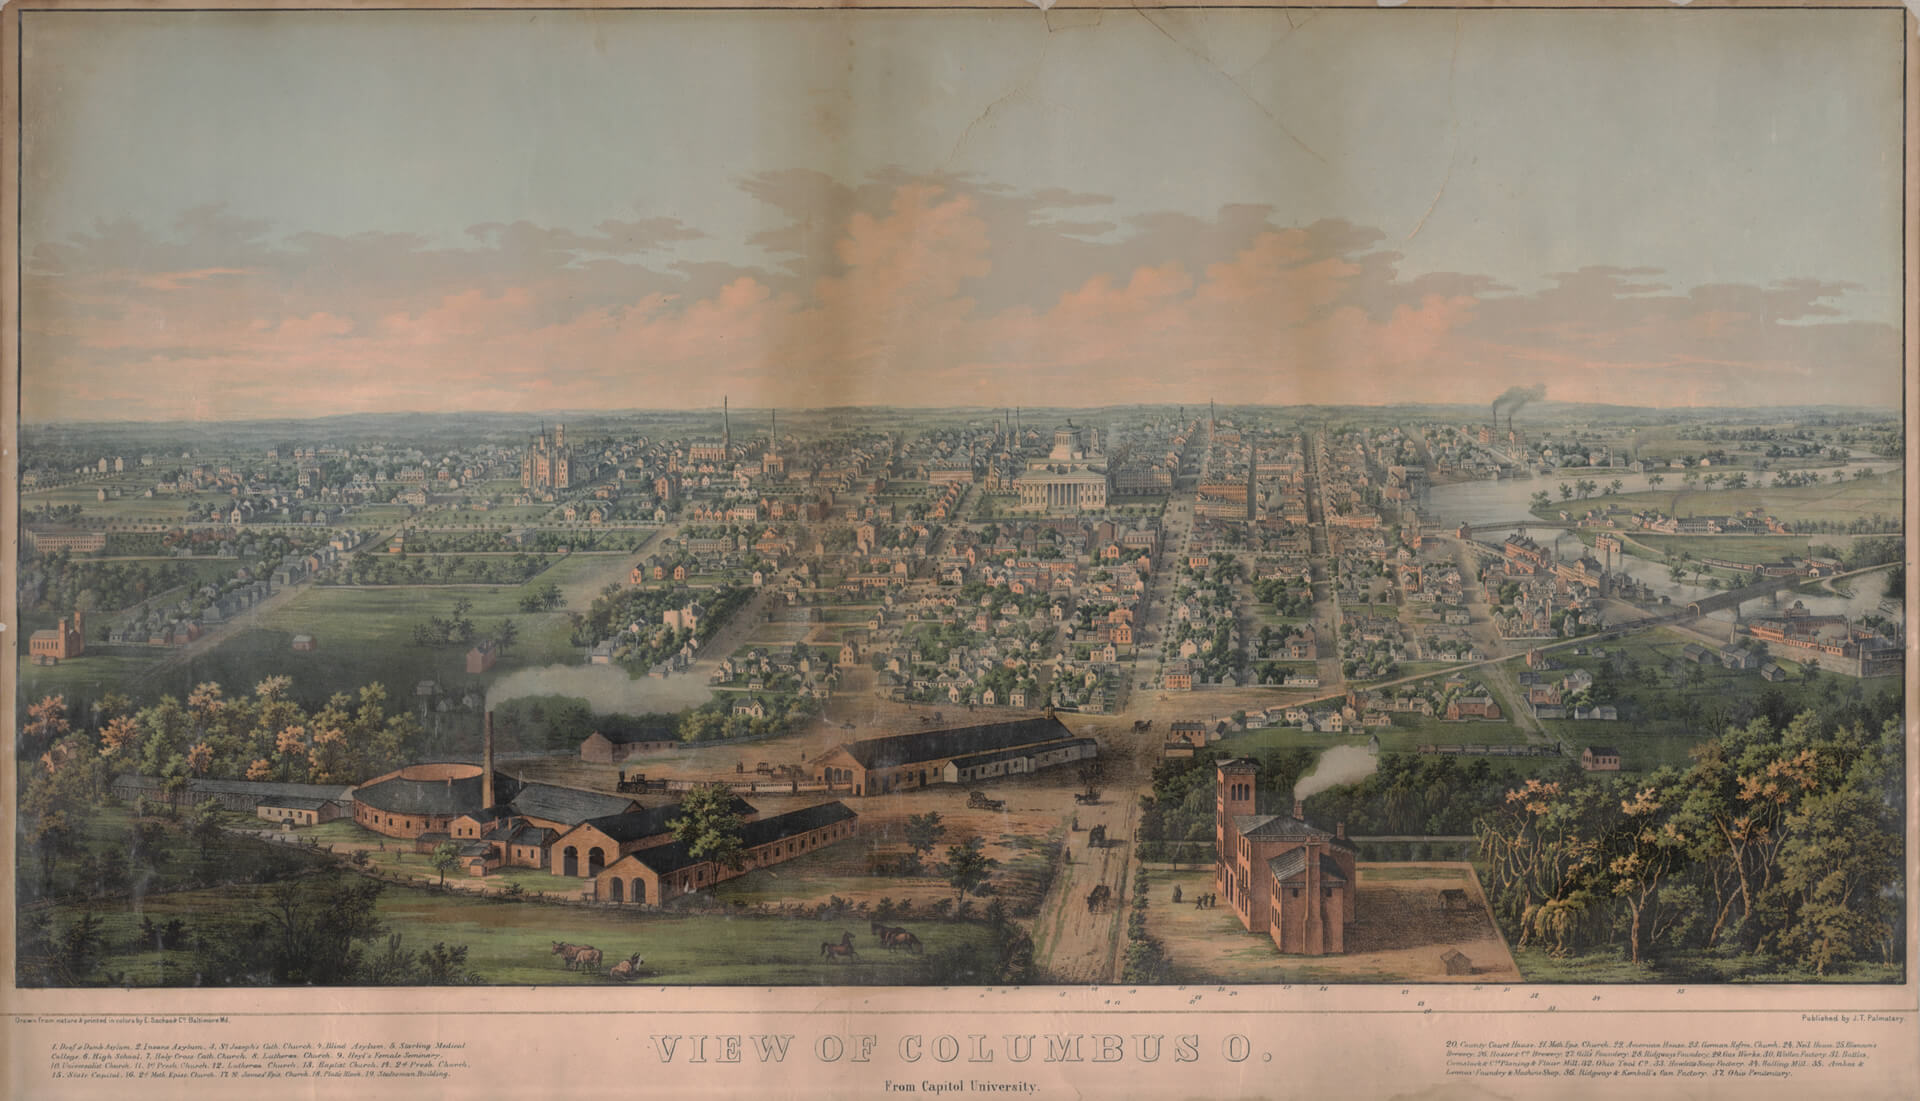 View of the city from Capital University in 1854